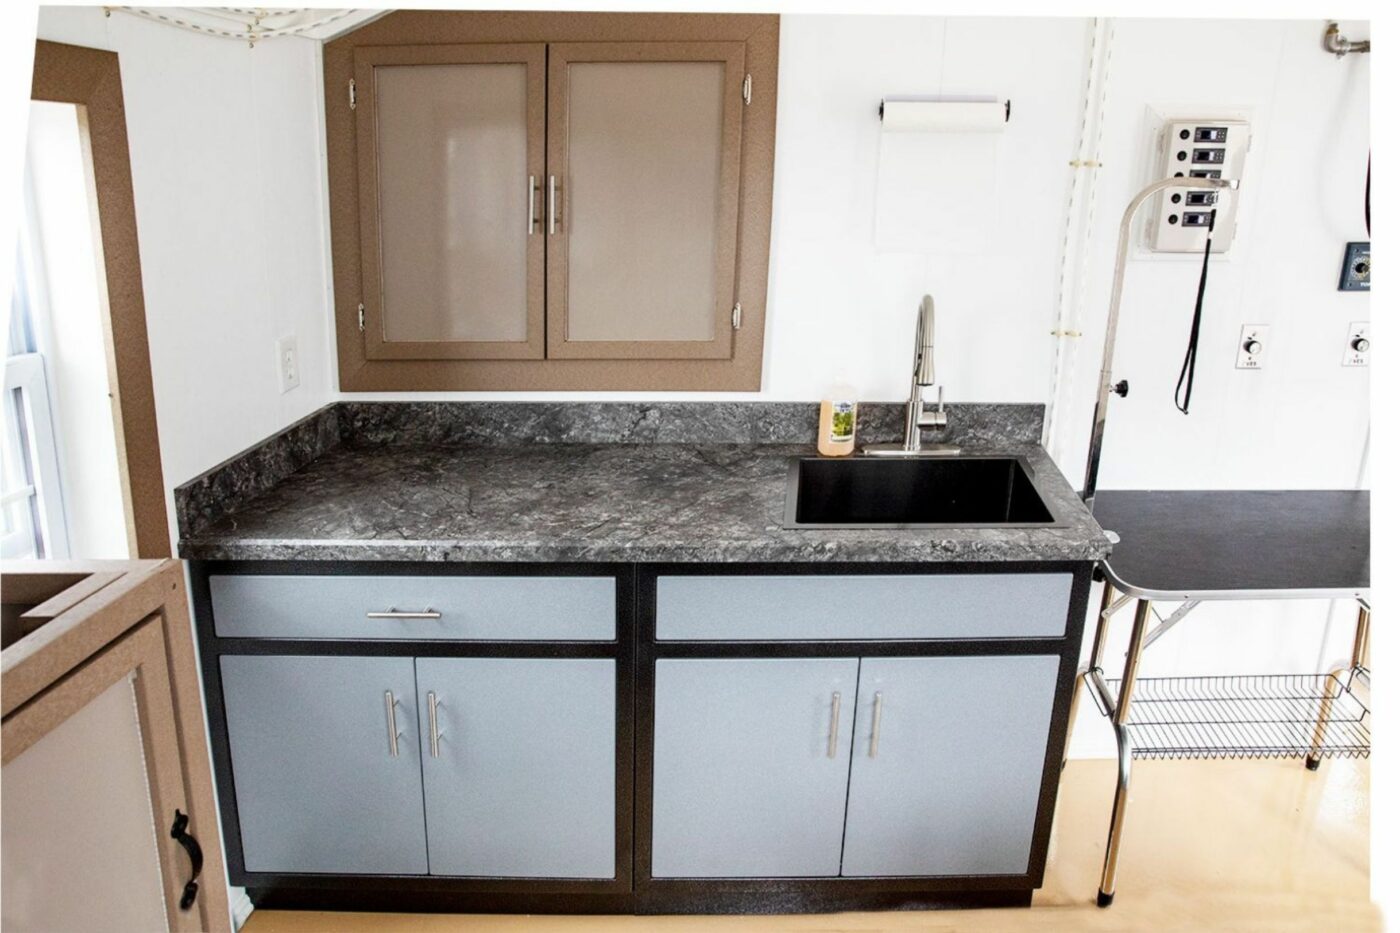 counter top with sink- aluminum cabinets